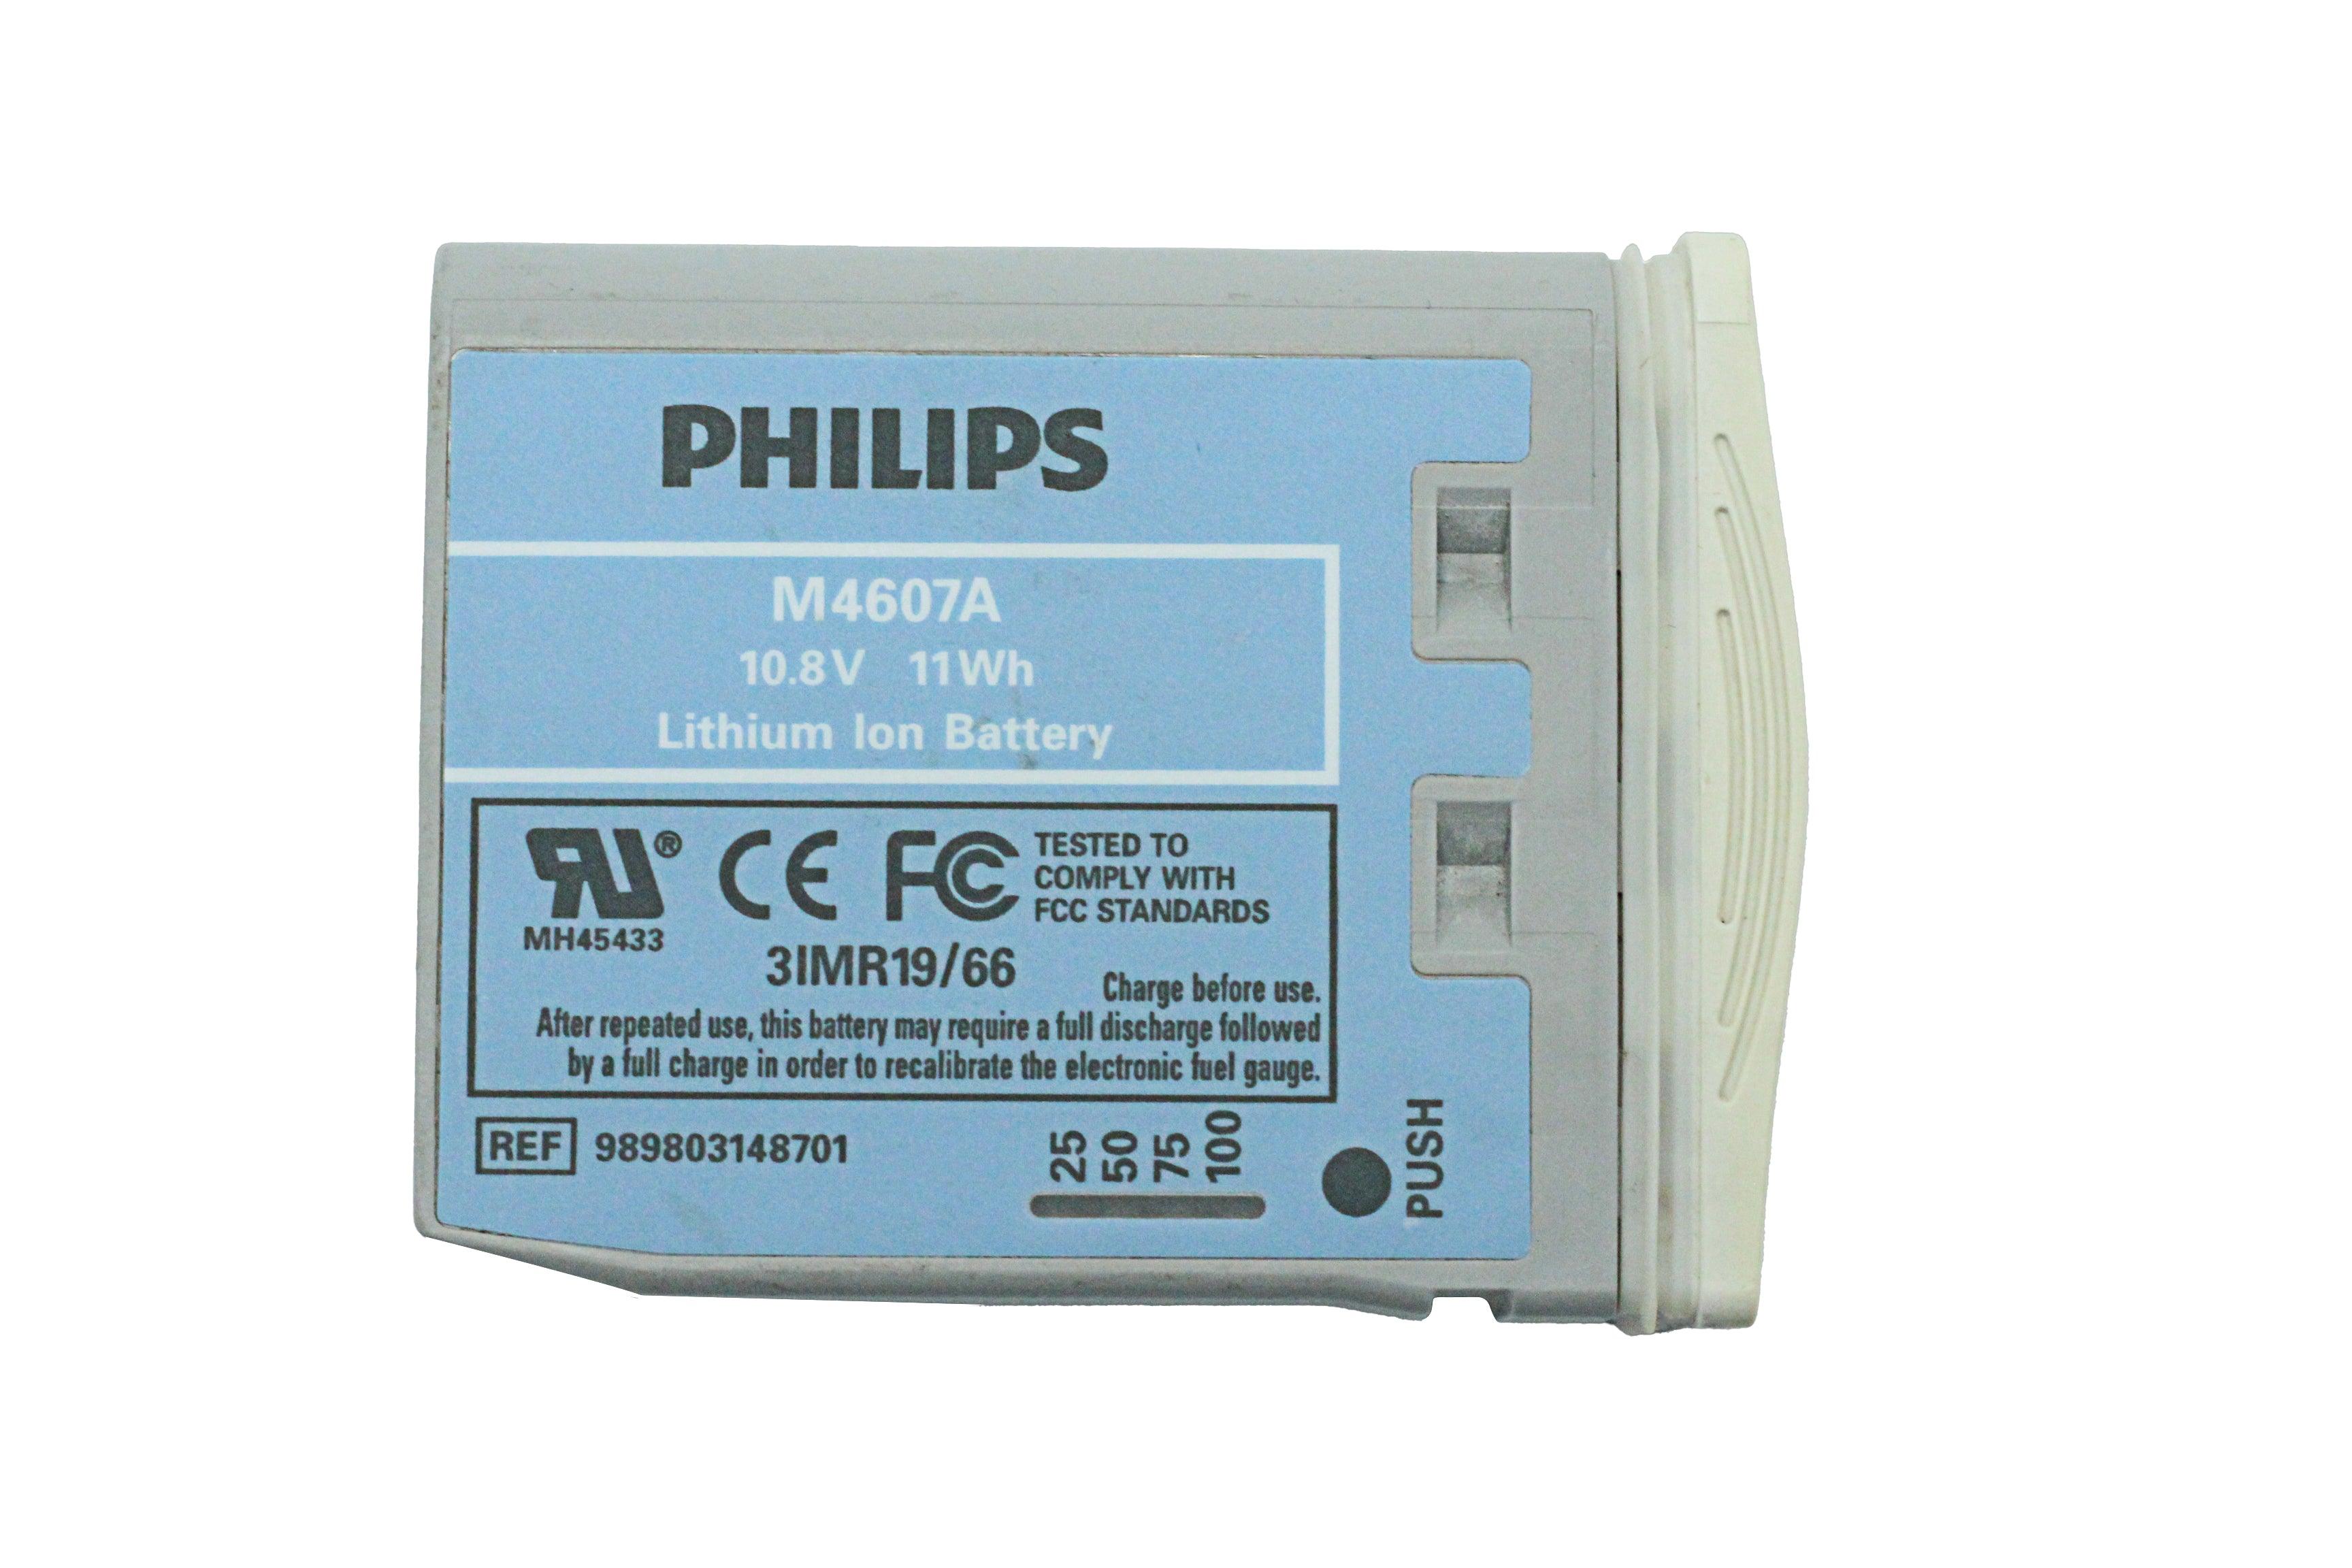 Original Philips M4607A for Philips IntelliVue MP2 X2 Transport Patient Monitor Battery 10.8V Li-ion Battery 989803148701 Medical Battery, Patient Monitor Battery, PHILIPS, Philips Battery, Rechargeable, Stock In Germany, top selling, Transport Patient Monitor Battery M4607A (10.8V) PHILIPS